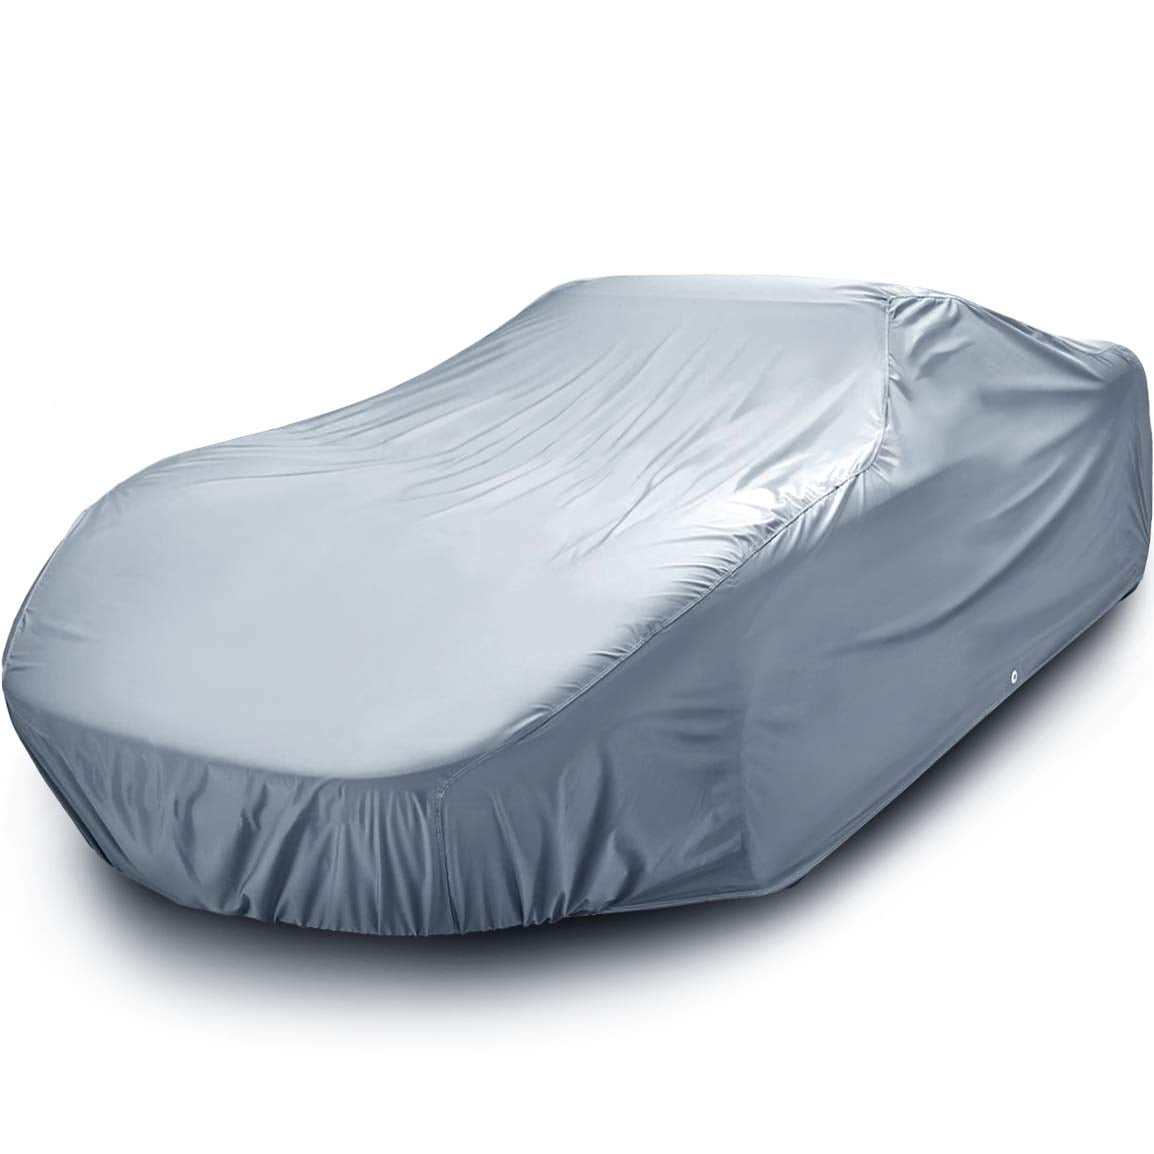 205-214 iCarCover 100-Layers Custom-Fit All Weather Waterproof Automobiles Indoor Outdoor Snow Rain Dust Hail Protection Full Auto Vehicle Durable Exterior Car Cover for Hatchback Coupe Sedan 